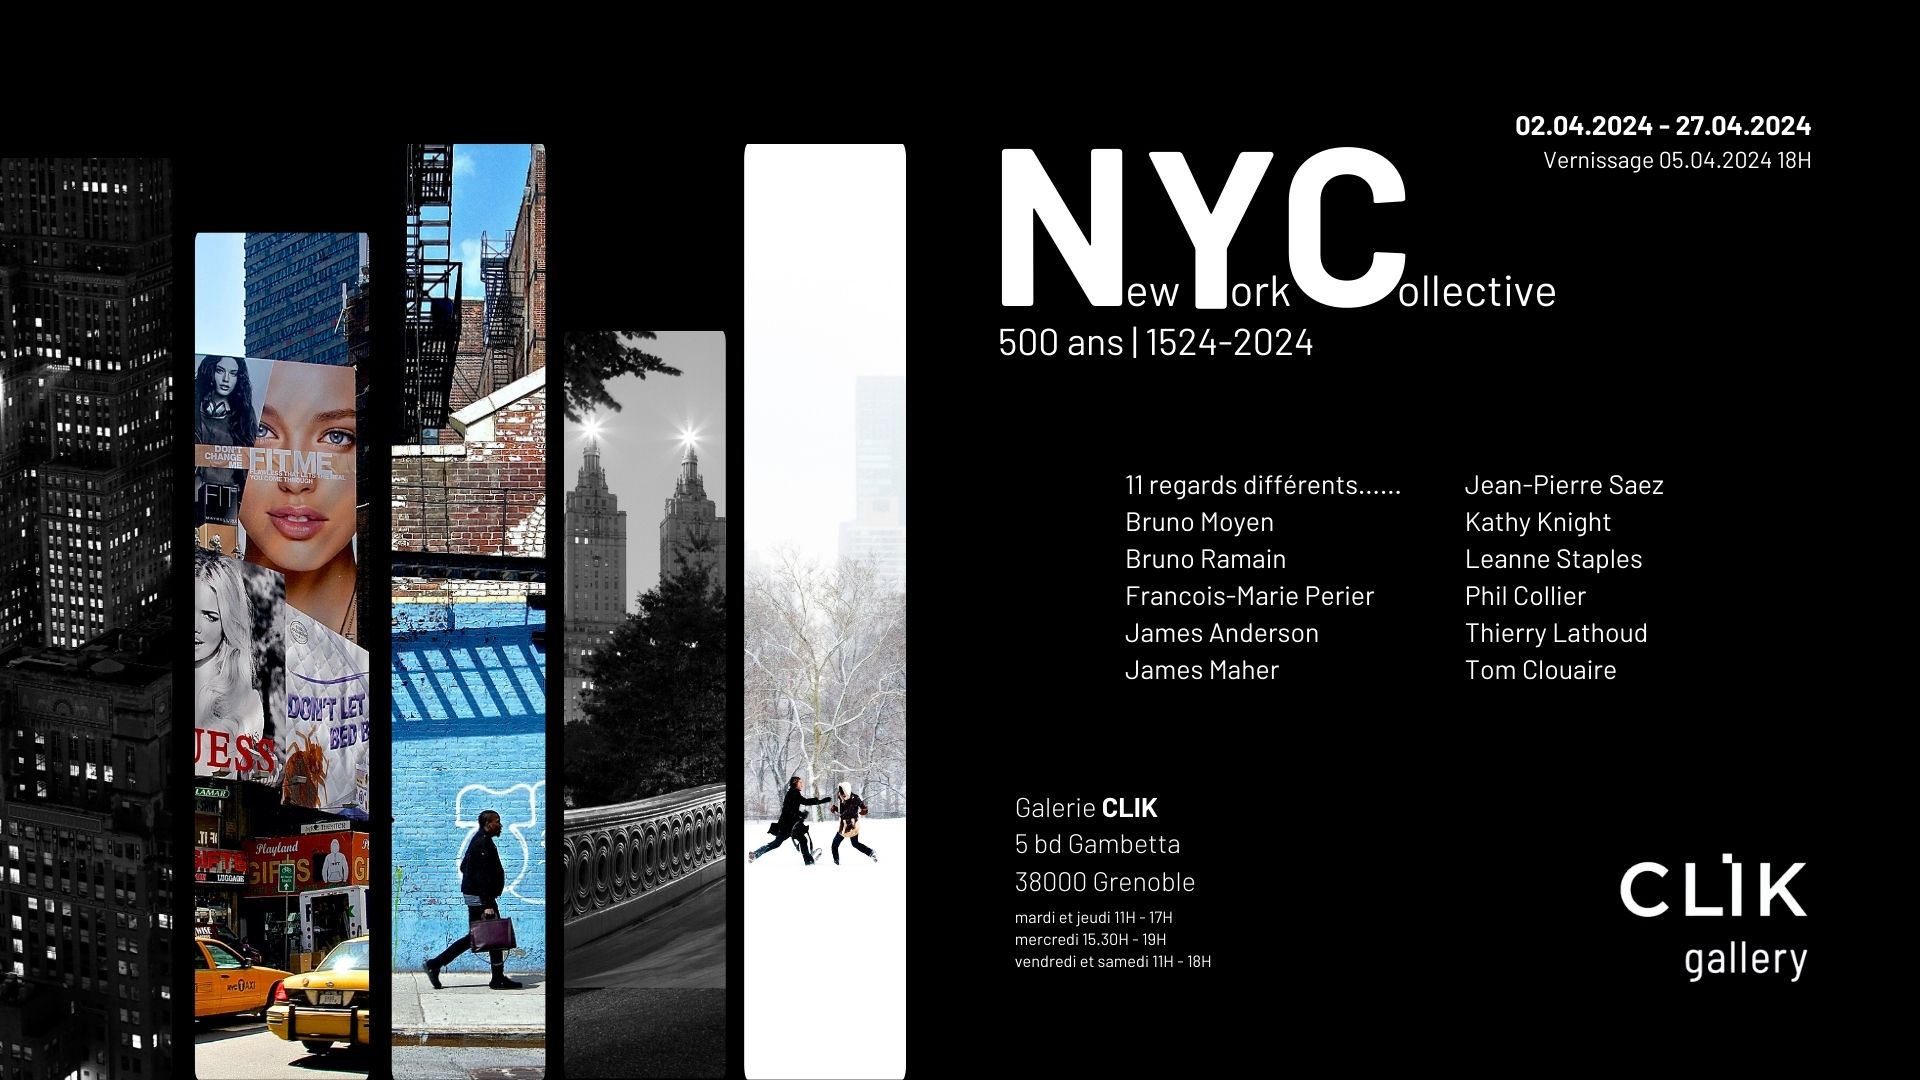 New York Collective | 500 ans - une exposition photo